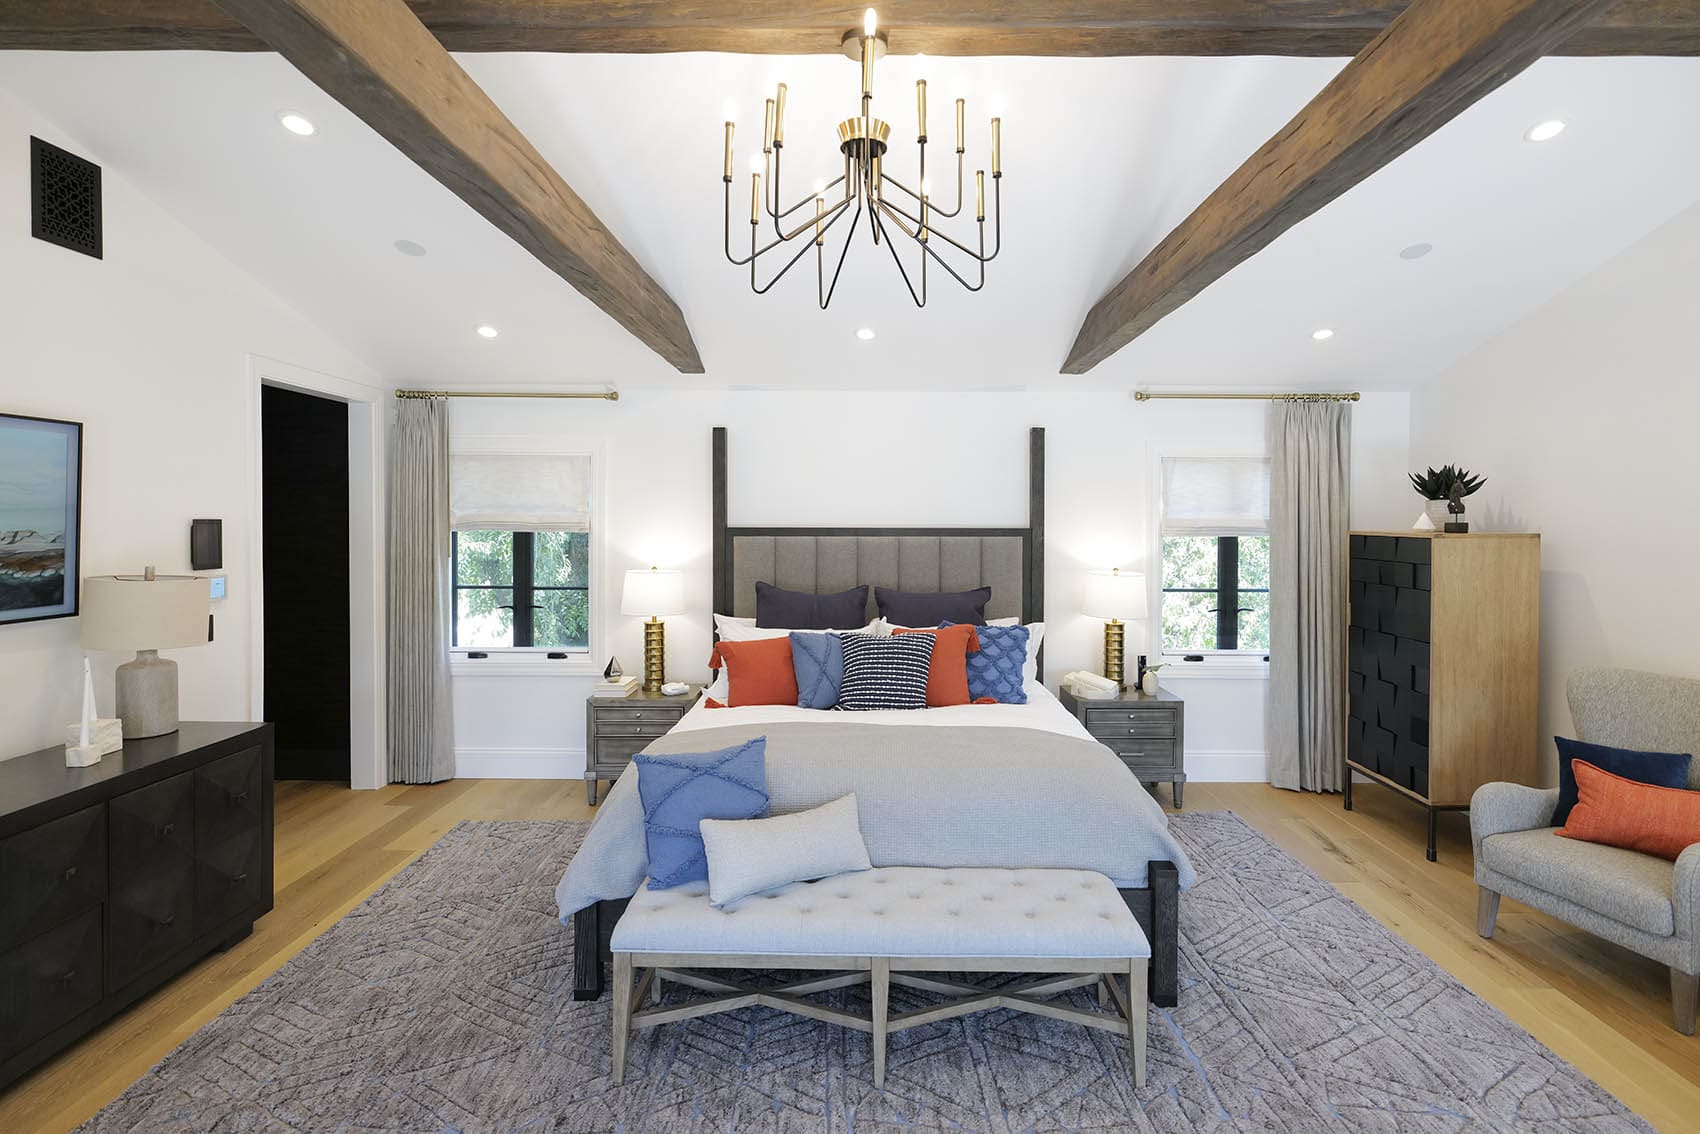 Bedroom with ceiling beams along the center of the ceiling.